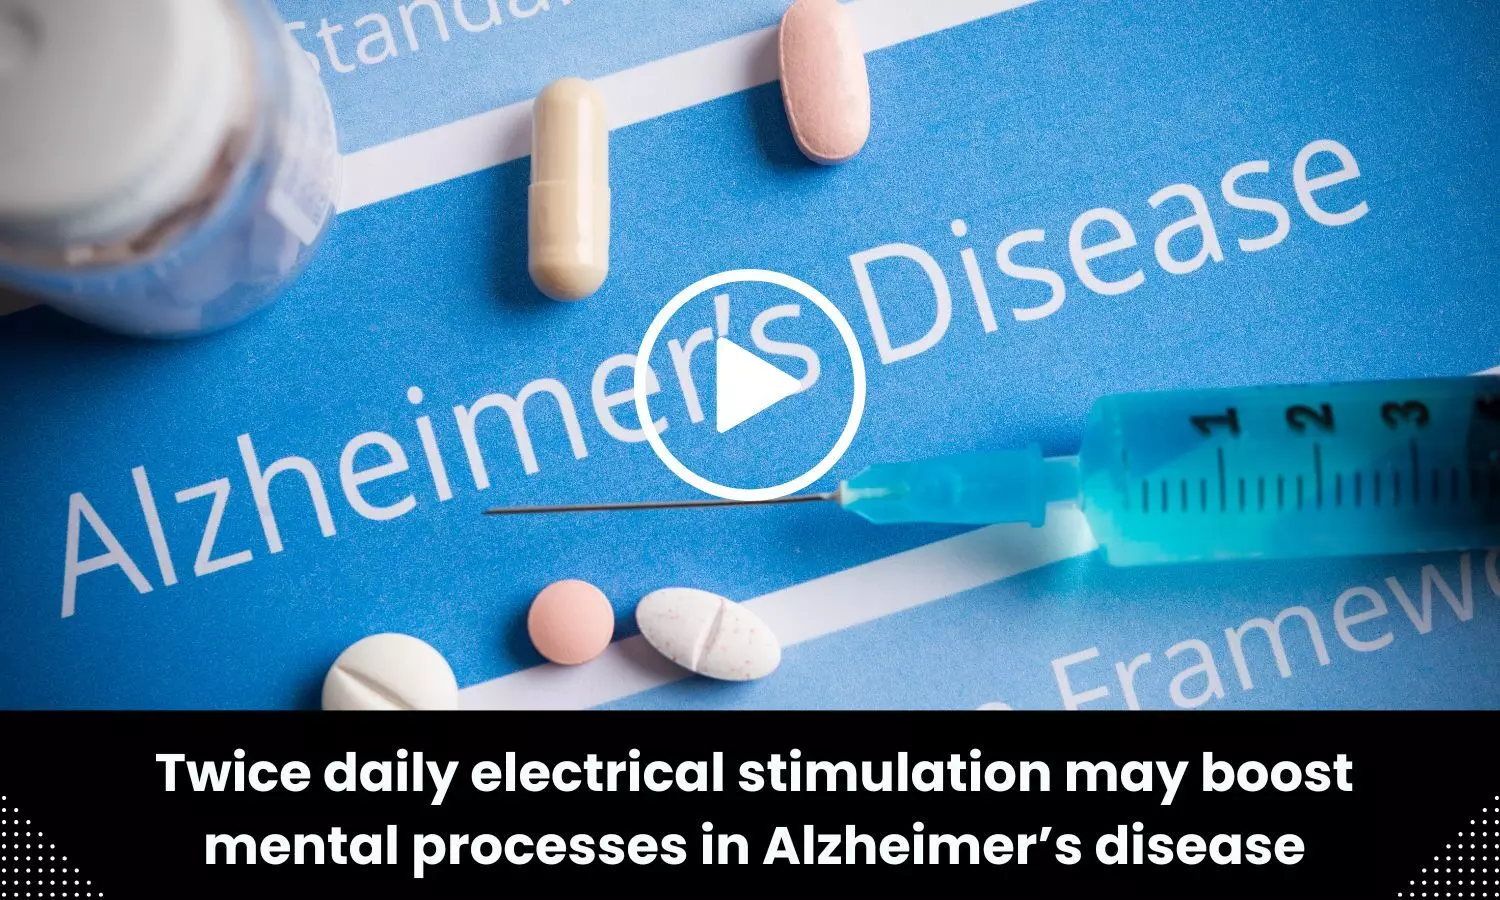 Twice daily electrical stimulation may boost mental processes in Alzheimers disease